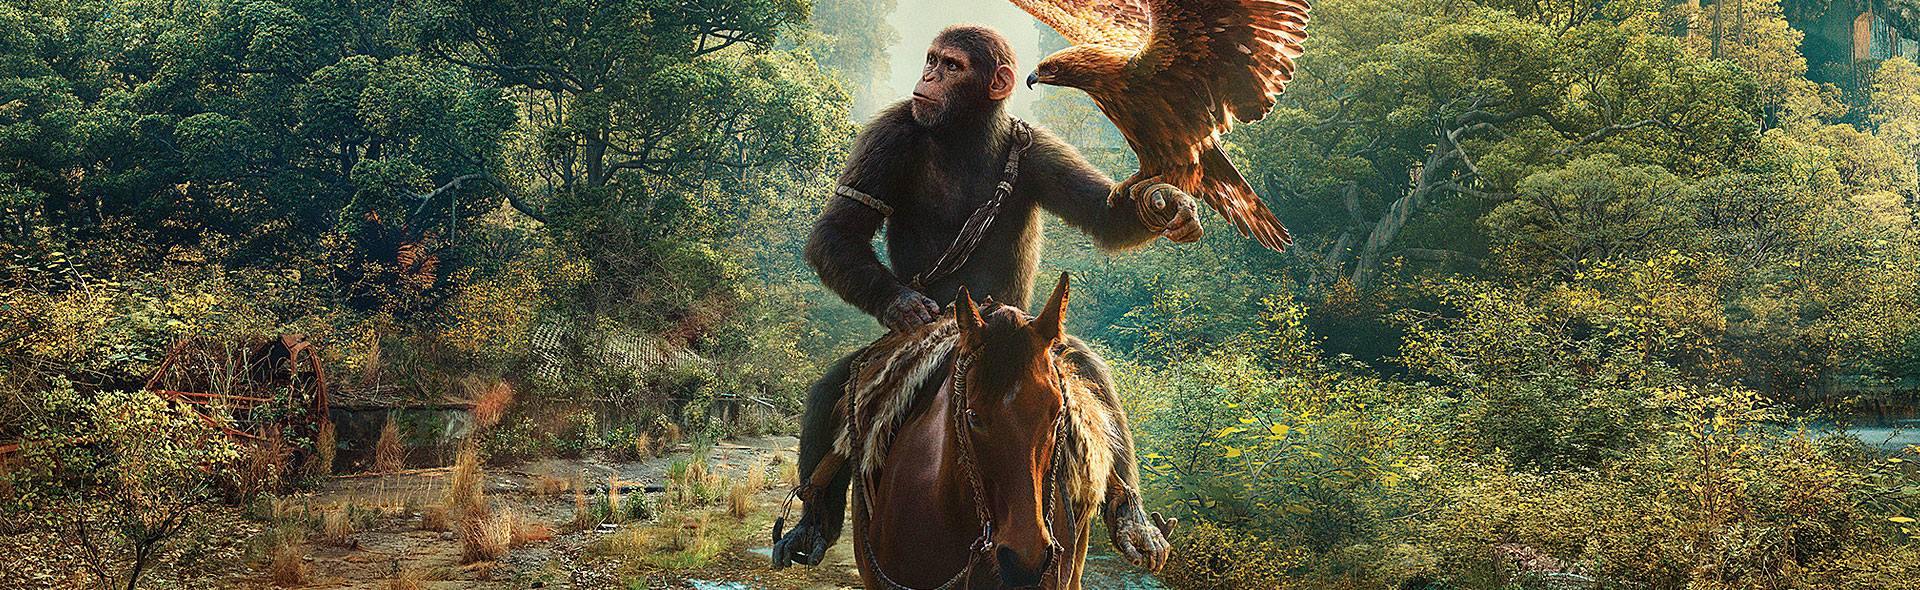 Kingdom of the planet of the apes_slide_poster